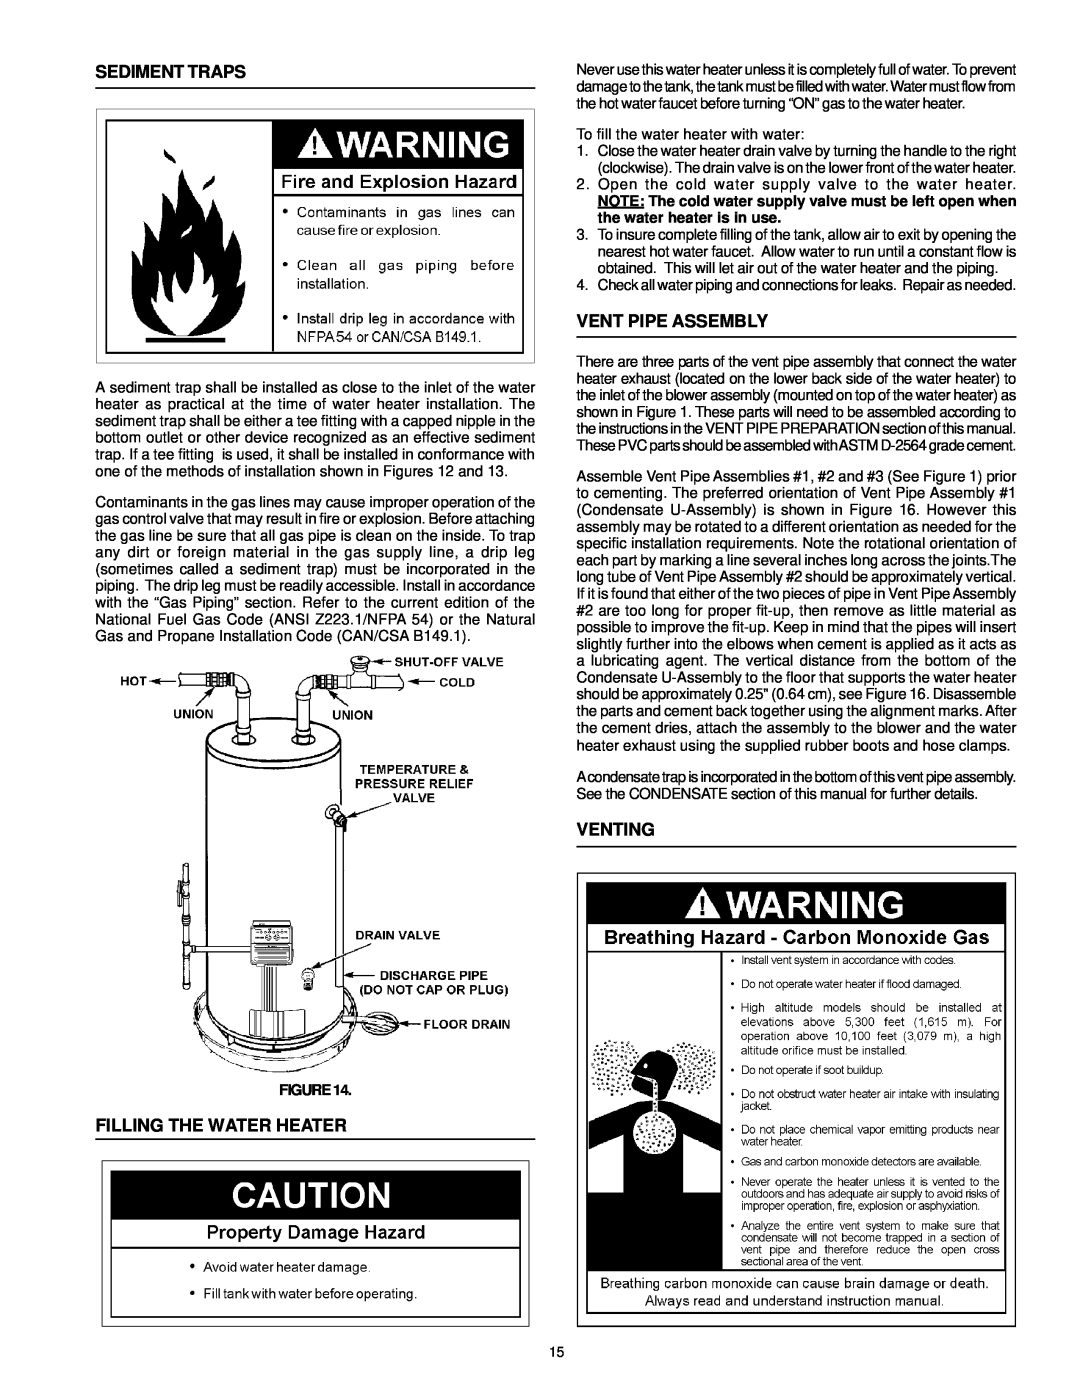 A.O. Smith ARGSS02708 instruction manual Sediment Traps, Filling The Water Heater, Vent Pipe Assembly, Venting 